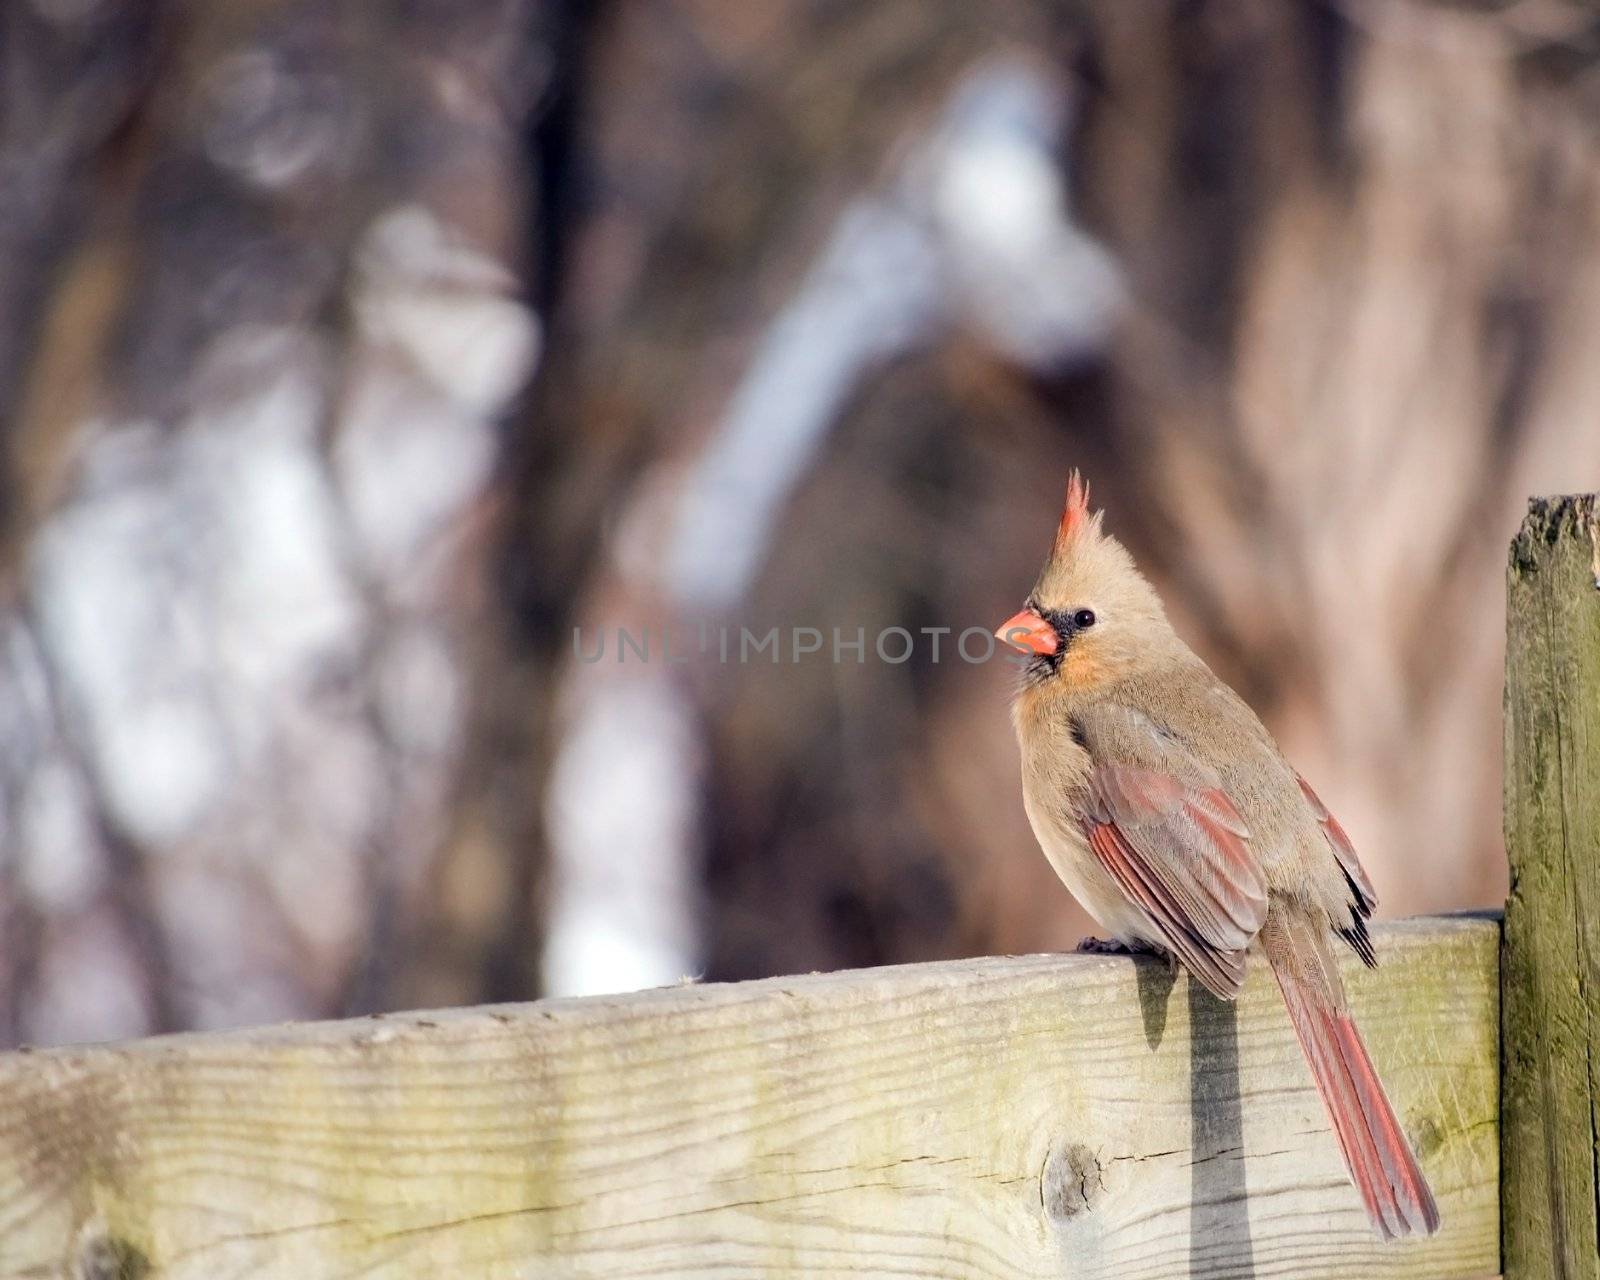 A female northern cardinal perched on a wooden fence.